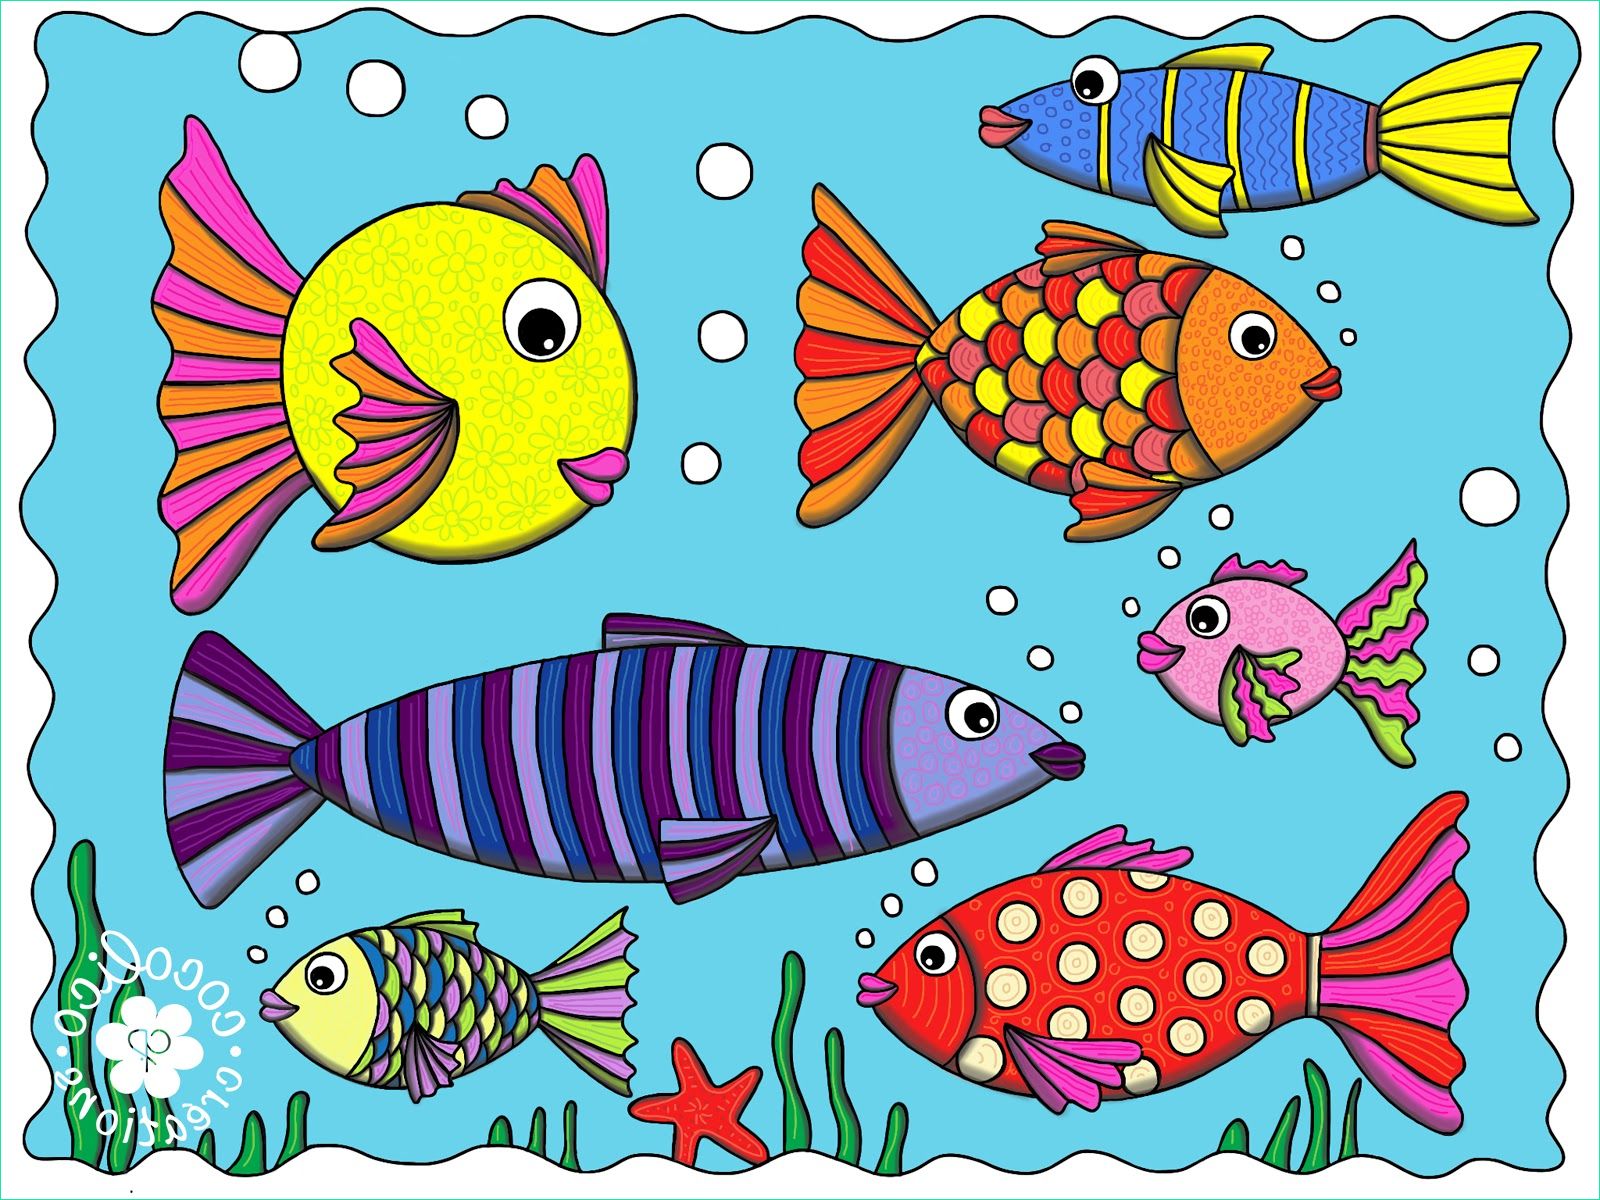 Dessin De Poisson D&amp;#039;avril Luxe Collection Cocolico Creations Poissons D Avril